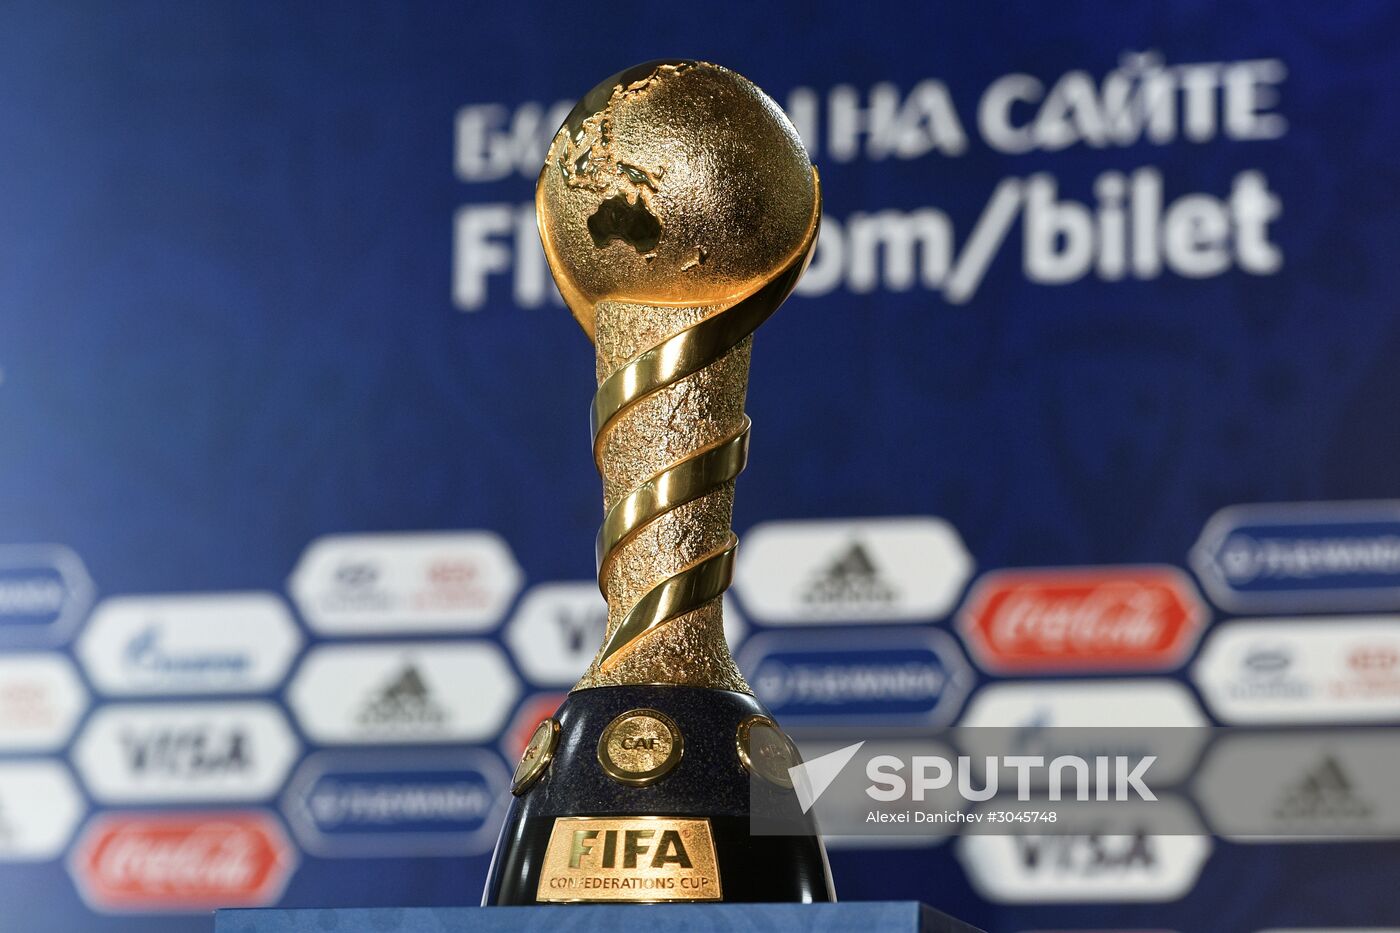 100 days to 2017 FIFA Confederations Cup